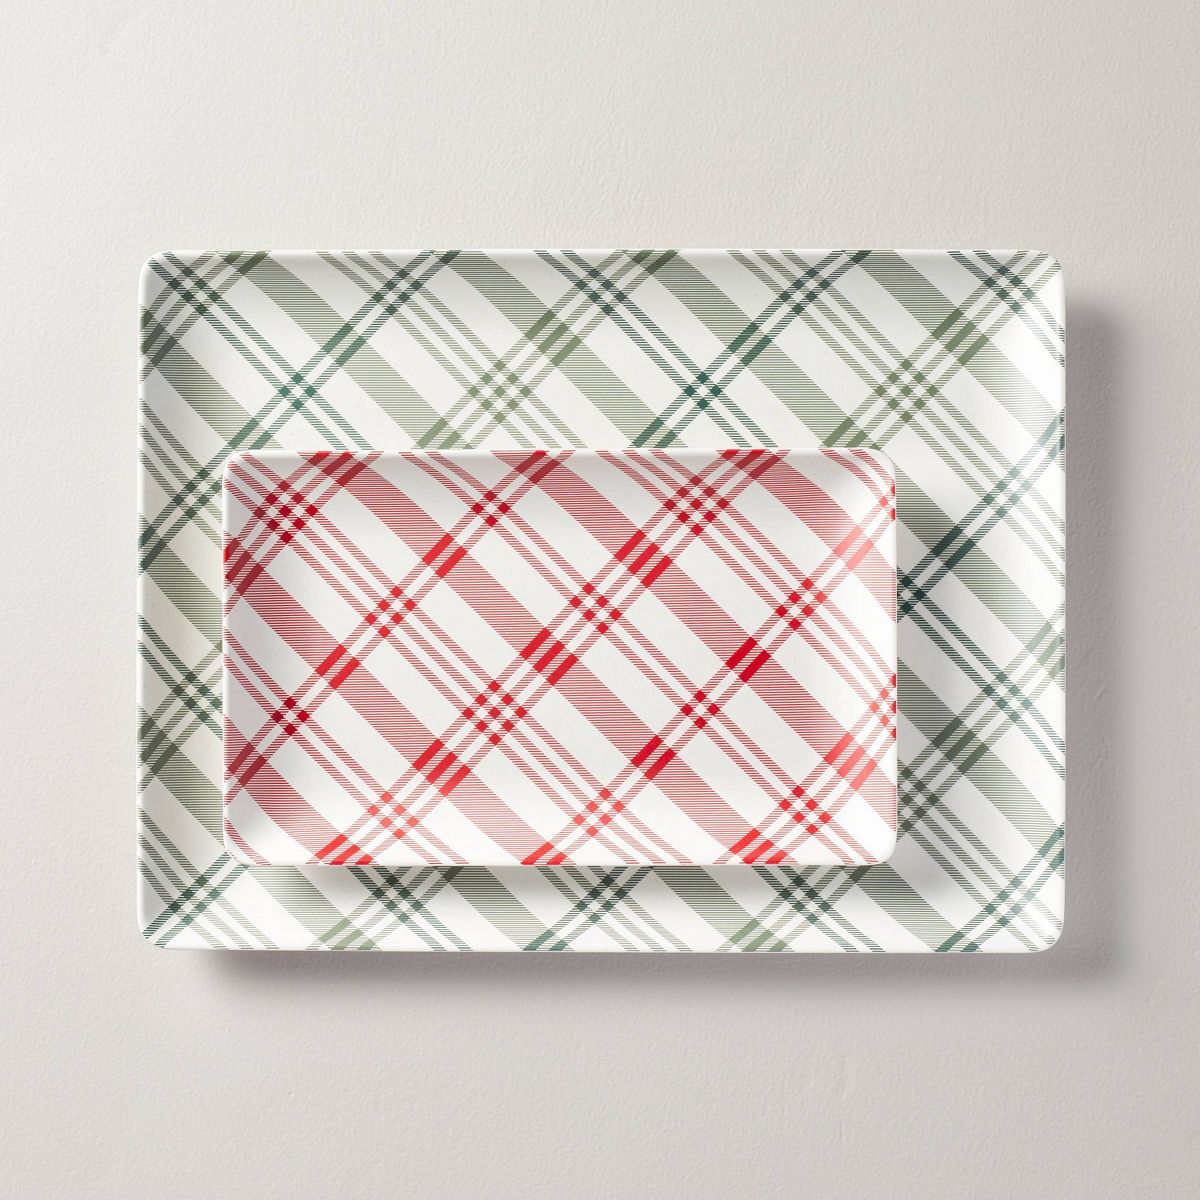 2pc Plaid Melamine Christmas Serving Trays Red/Green/Cream - Hearth & Hand™ with Magnolia | Target